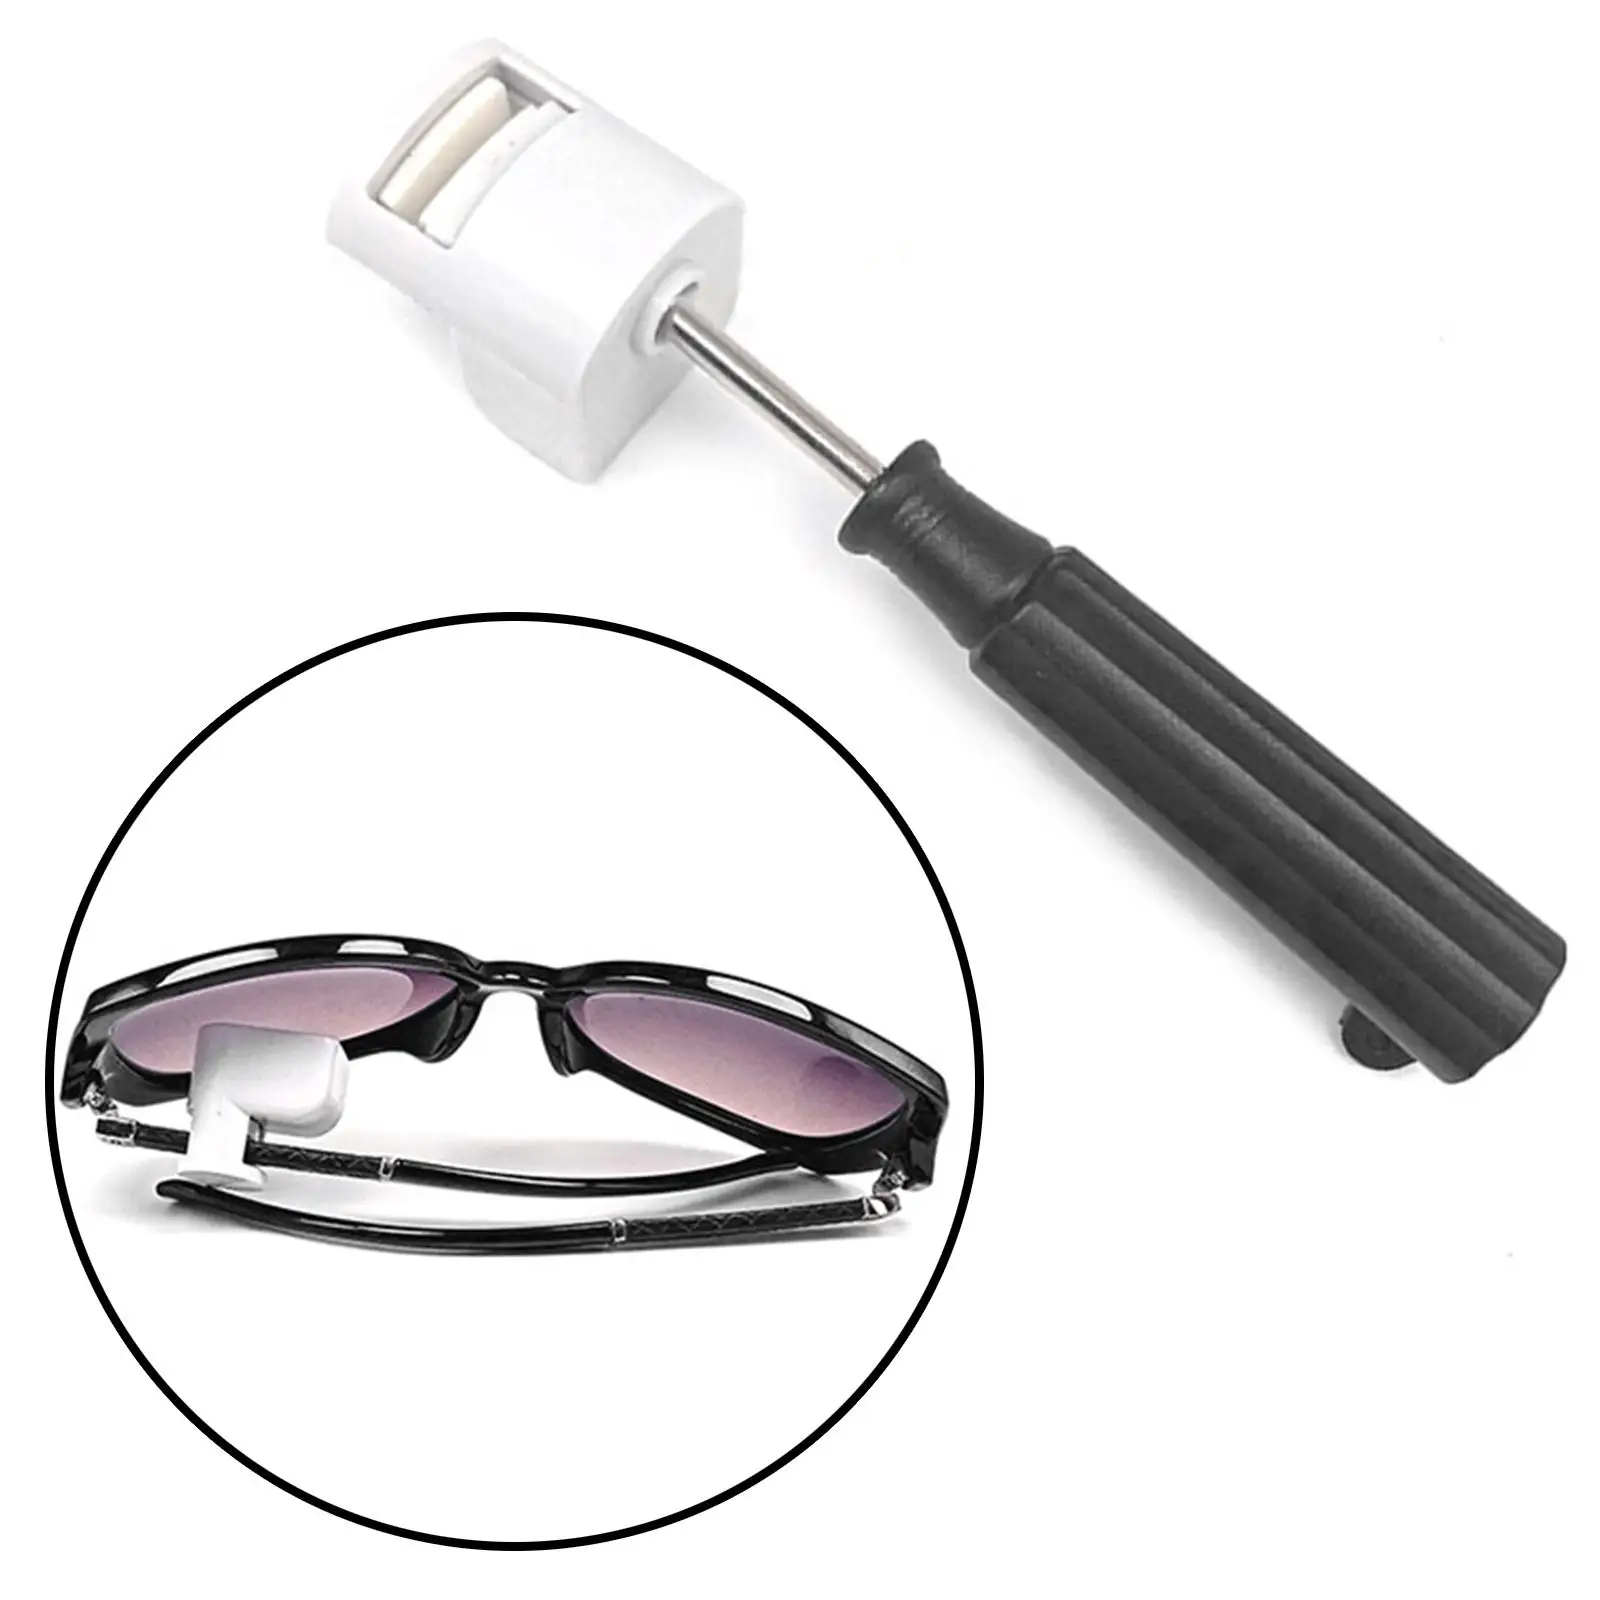 Glasses Screwdriver Compact Household Sunglasses Disassembly Triangle Screwdriver Remover Fix Glasses Frame Eyeglass Repairing